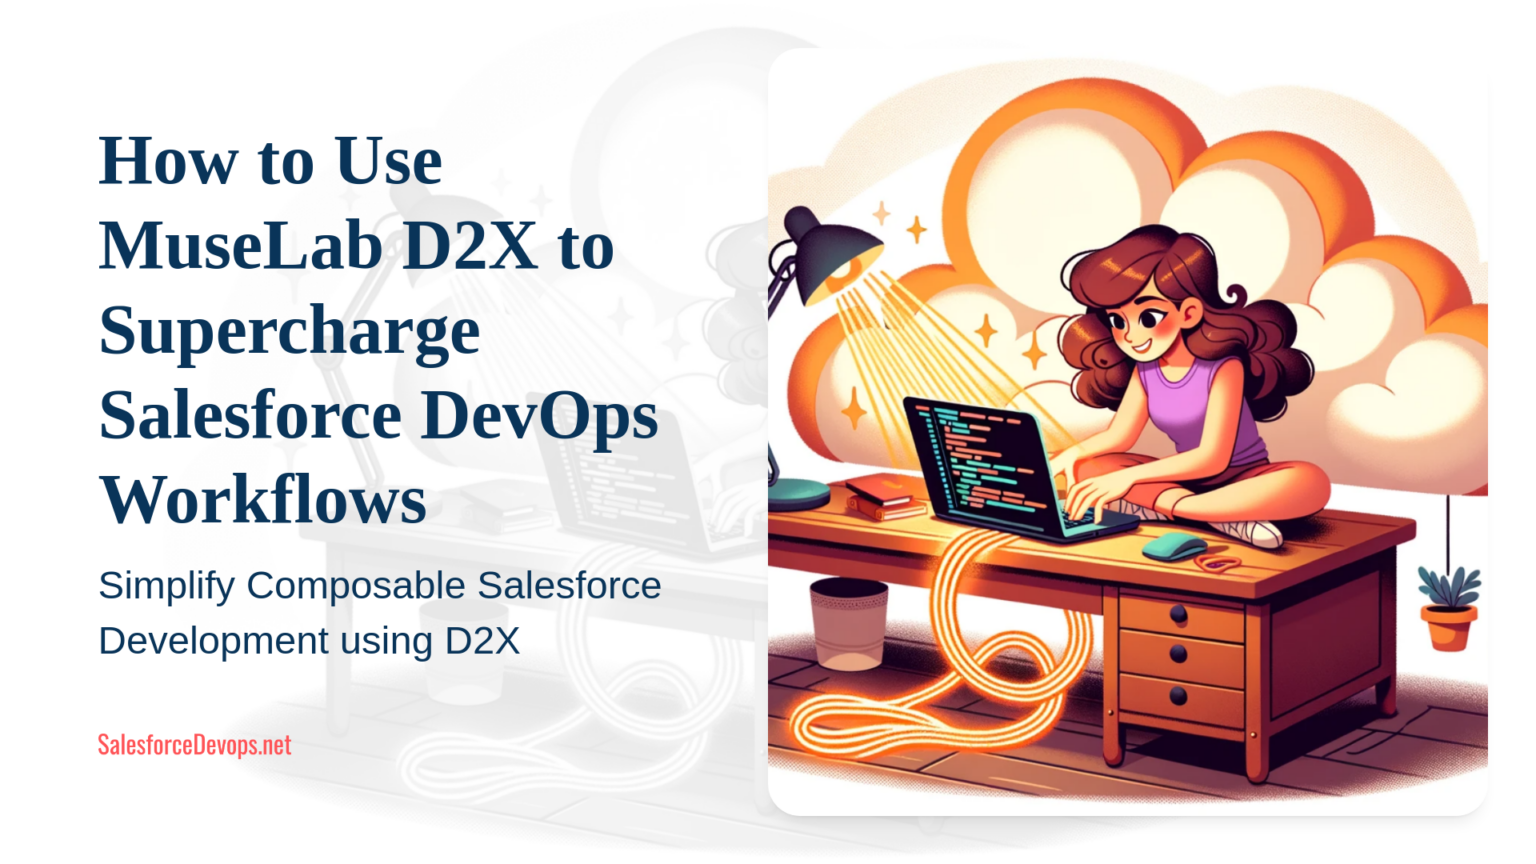 How to Use MuseLab D2X to Supercharge Salesforce DevOps Workflows